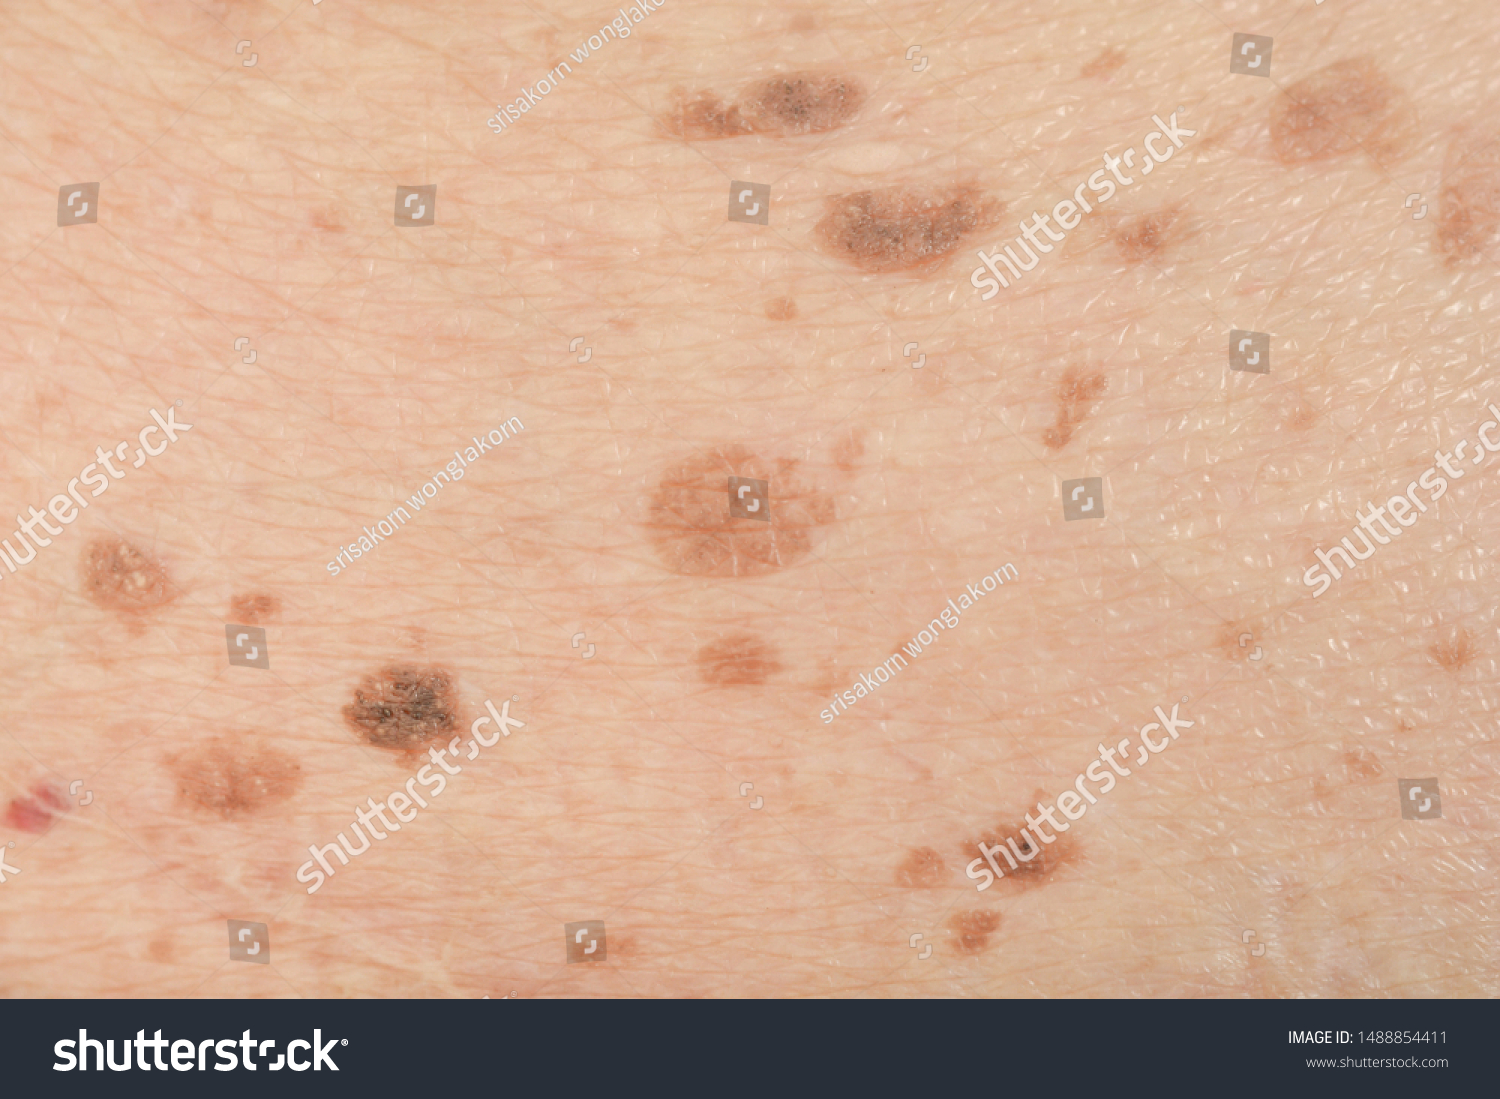 Dark spots and skin problems and itching Skin disease  freckles on the skin #1488854411